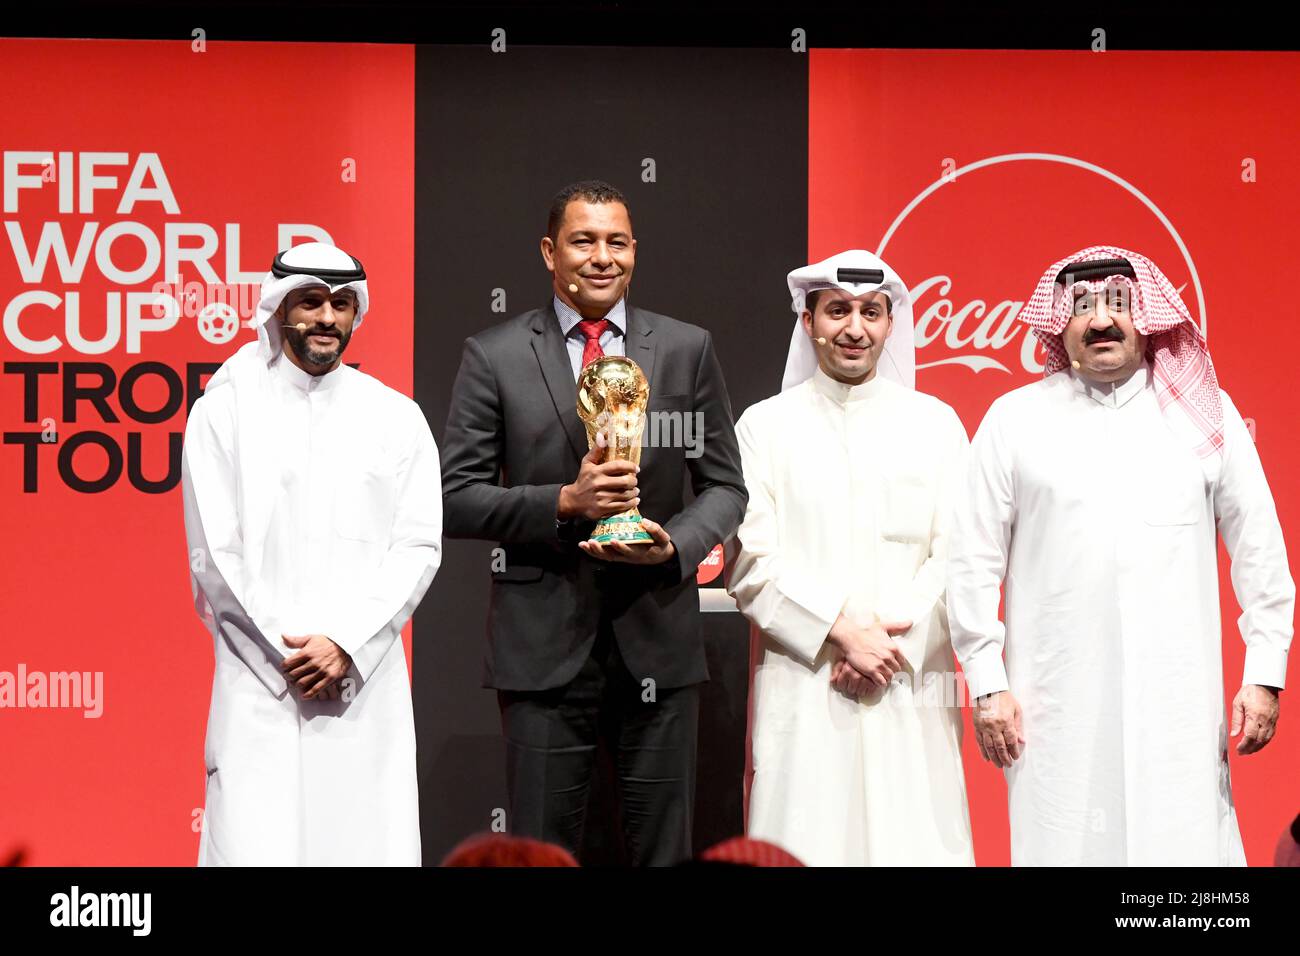 Kuwait City. 16th May, 2022. Brazilian former soccer player Gilberto Silva (2nd L) displays the World Cup trophy during a FIFA World Cup Trophy Tour event in Kuwait City, Kuwait, May 16, 2022. Credit: Xinhua/Alamy Live News Stock Photo